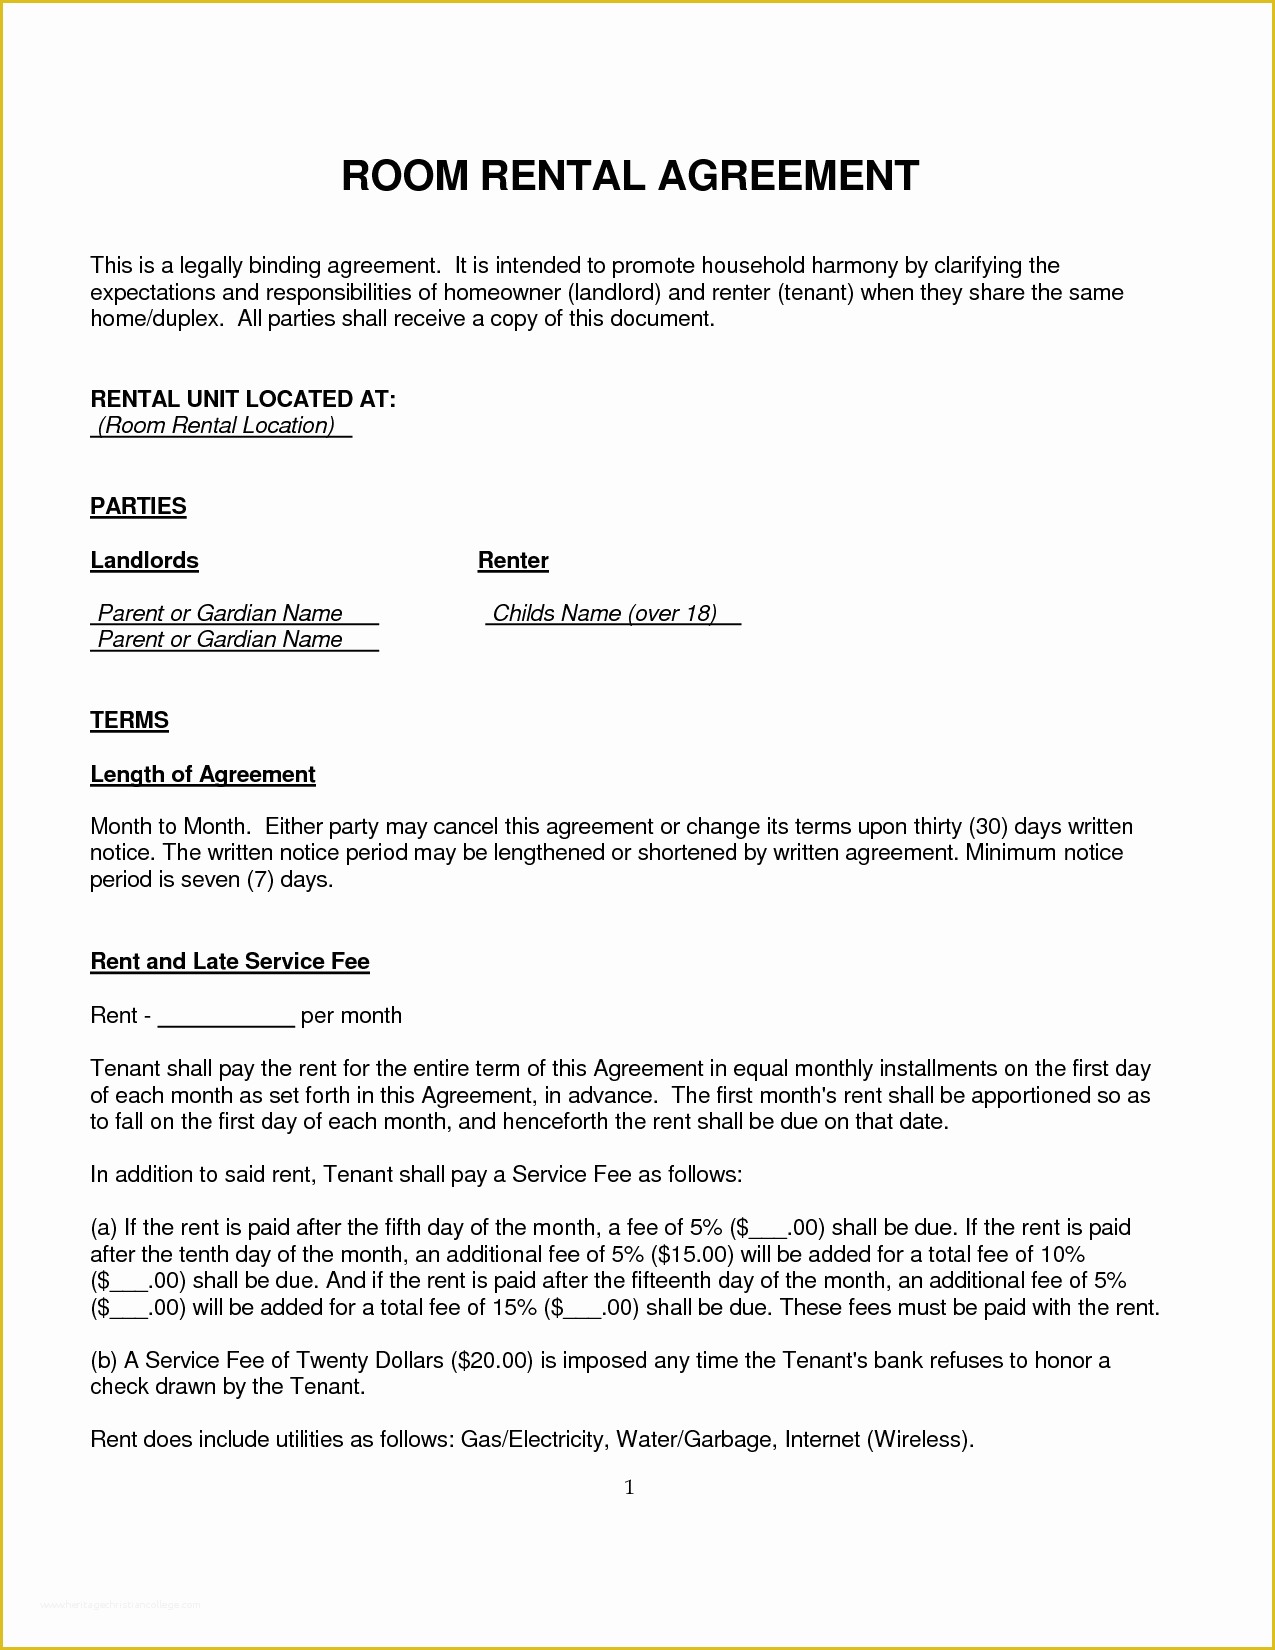 Free Room Rental Agreement Template Of 10 Best Of Basic Room Rental Agreement form